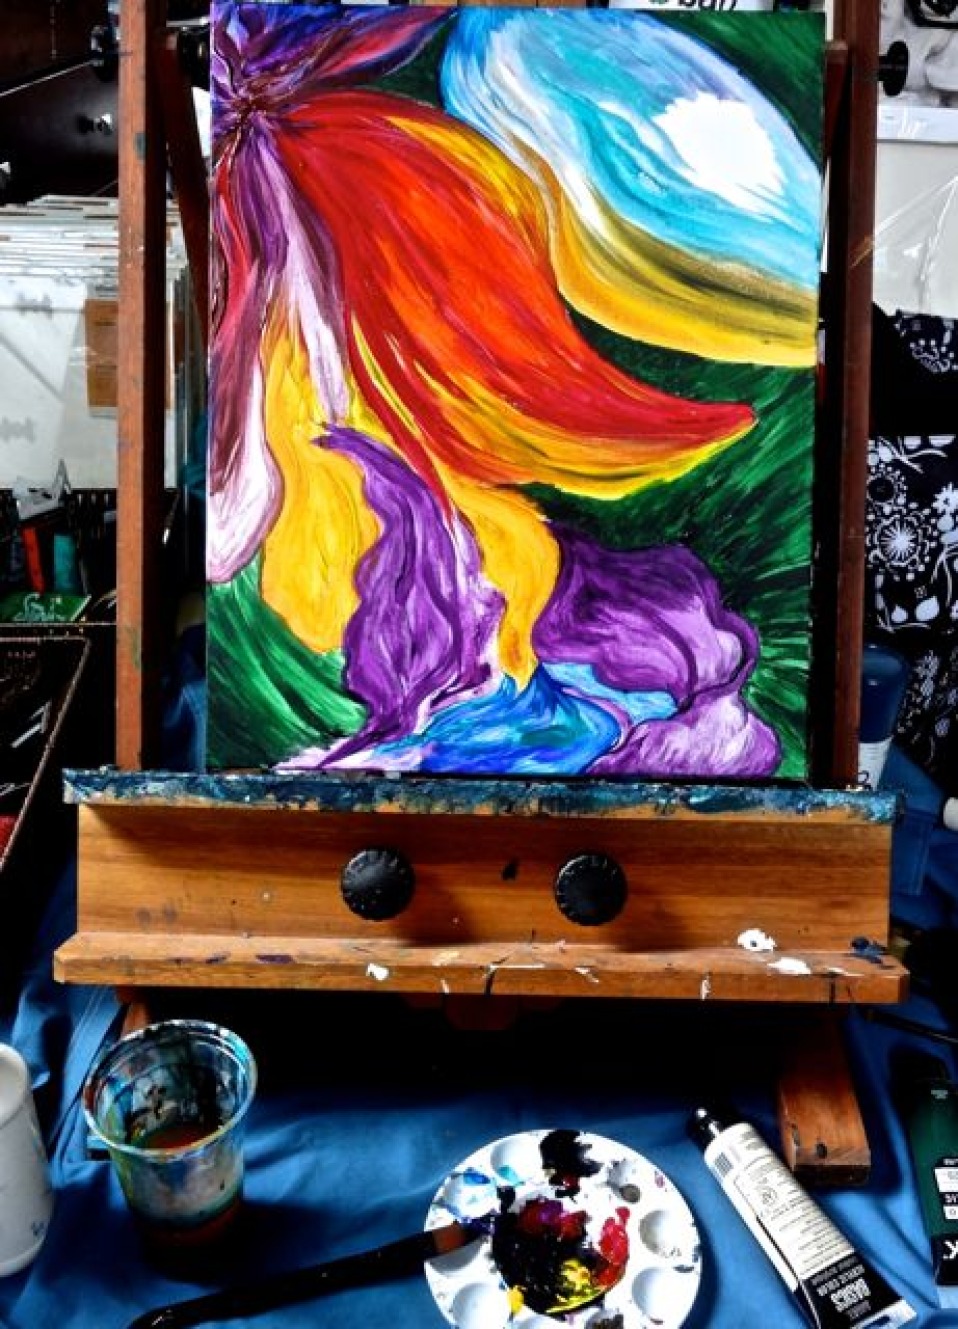 On the Easel ~ Something Colorful in the Making